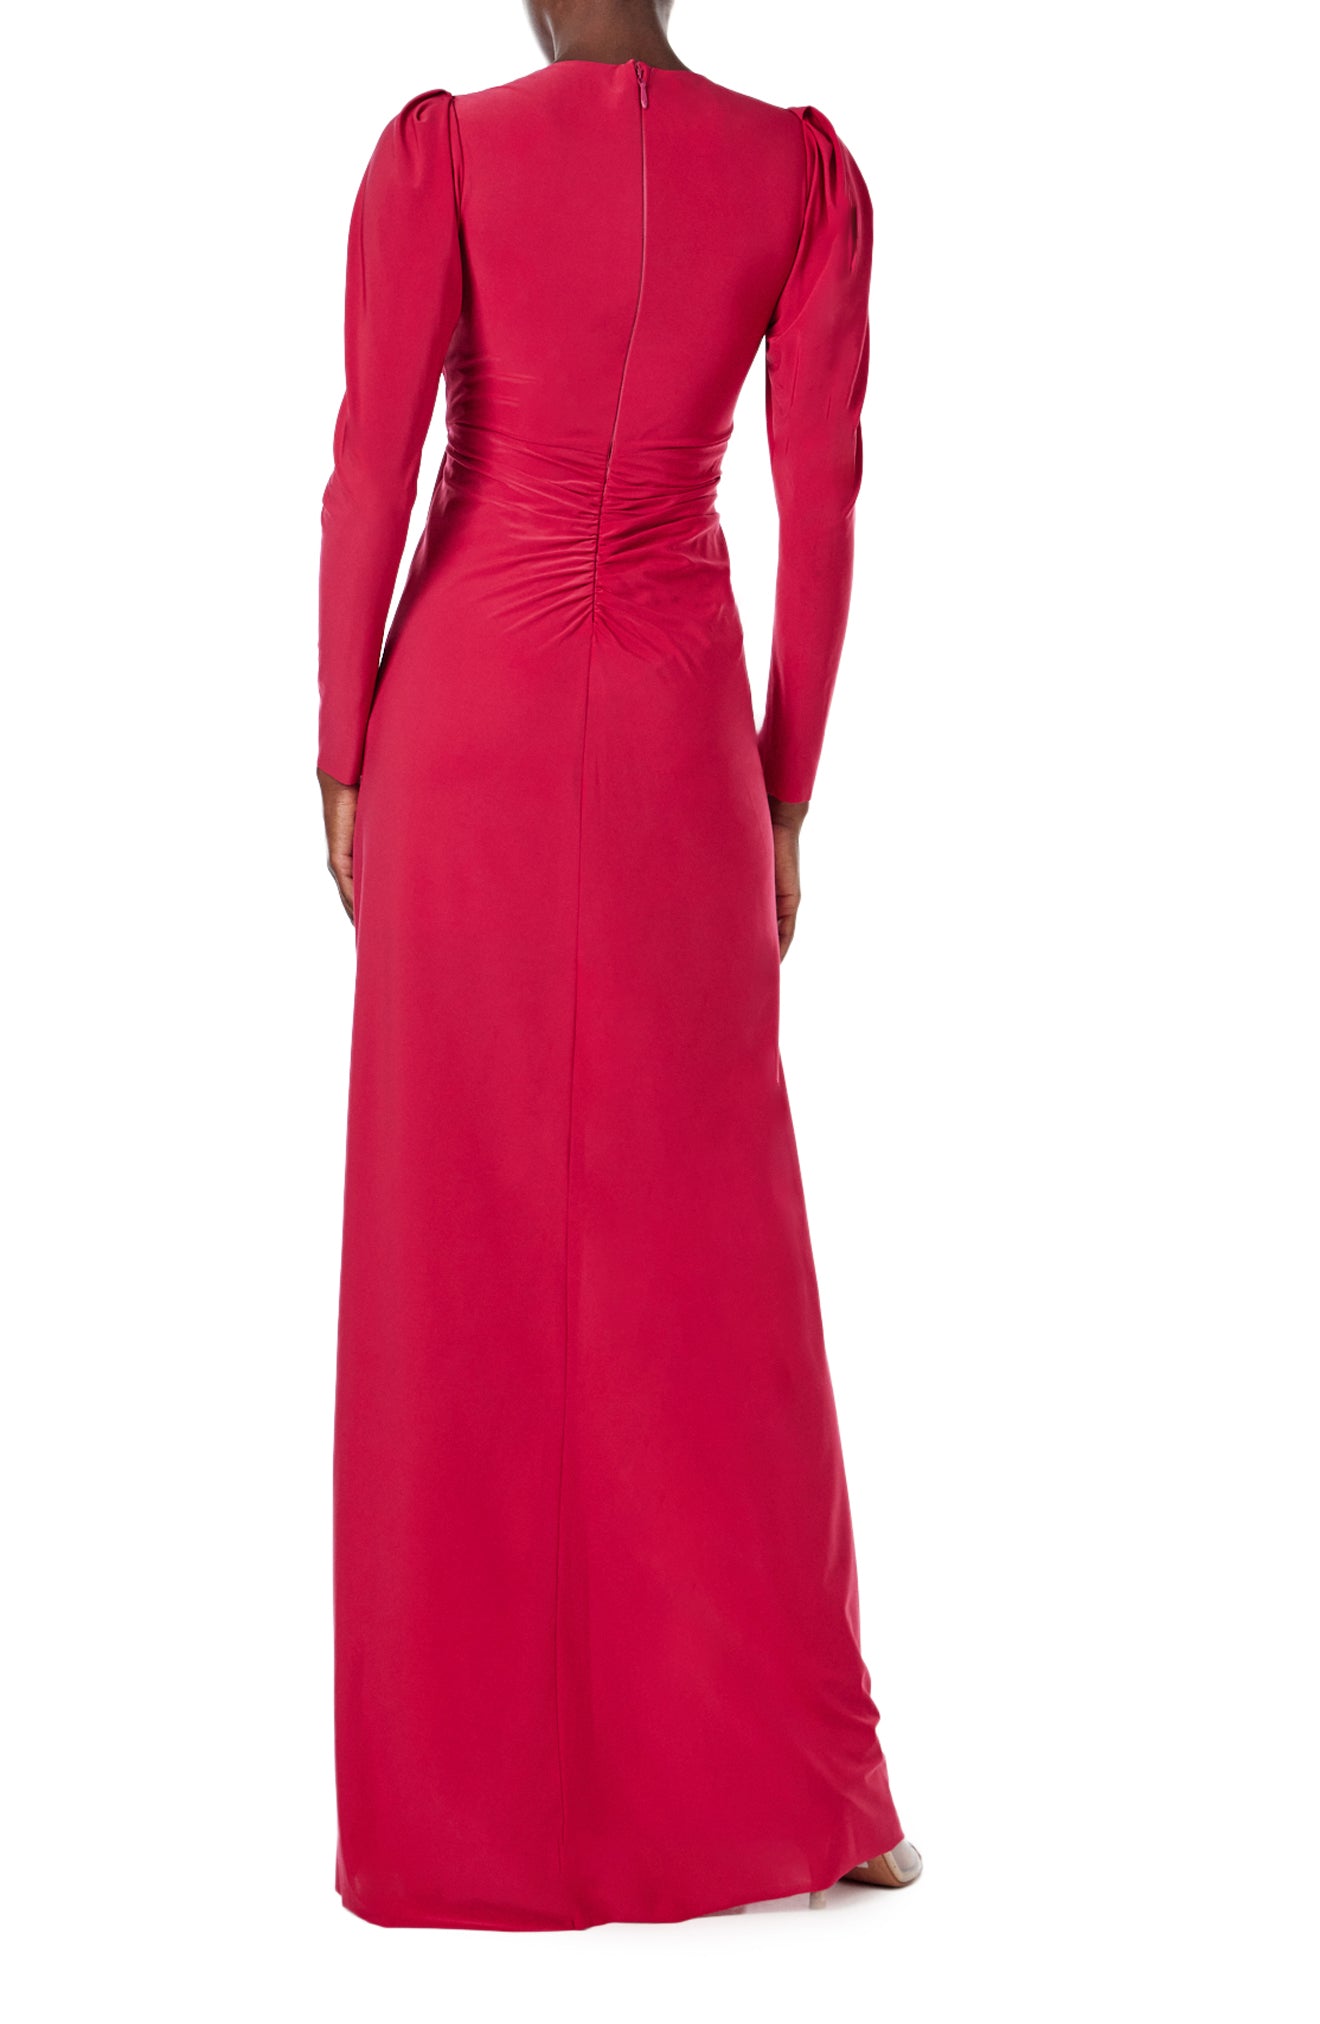 Monique Lhuillier Spring 2024 scarlet red matte jersey long sleeve, gown with draped bodice, jewel neckline and high front skirt slit - back.